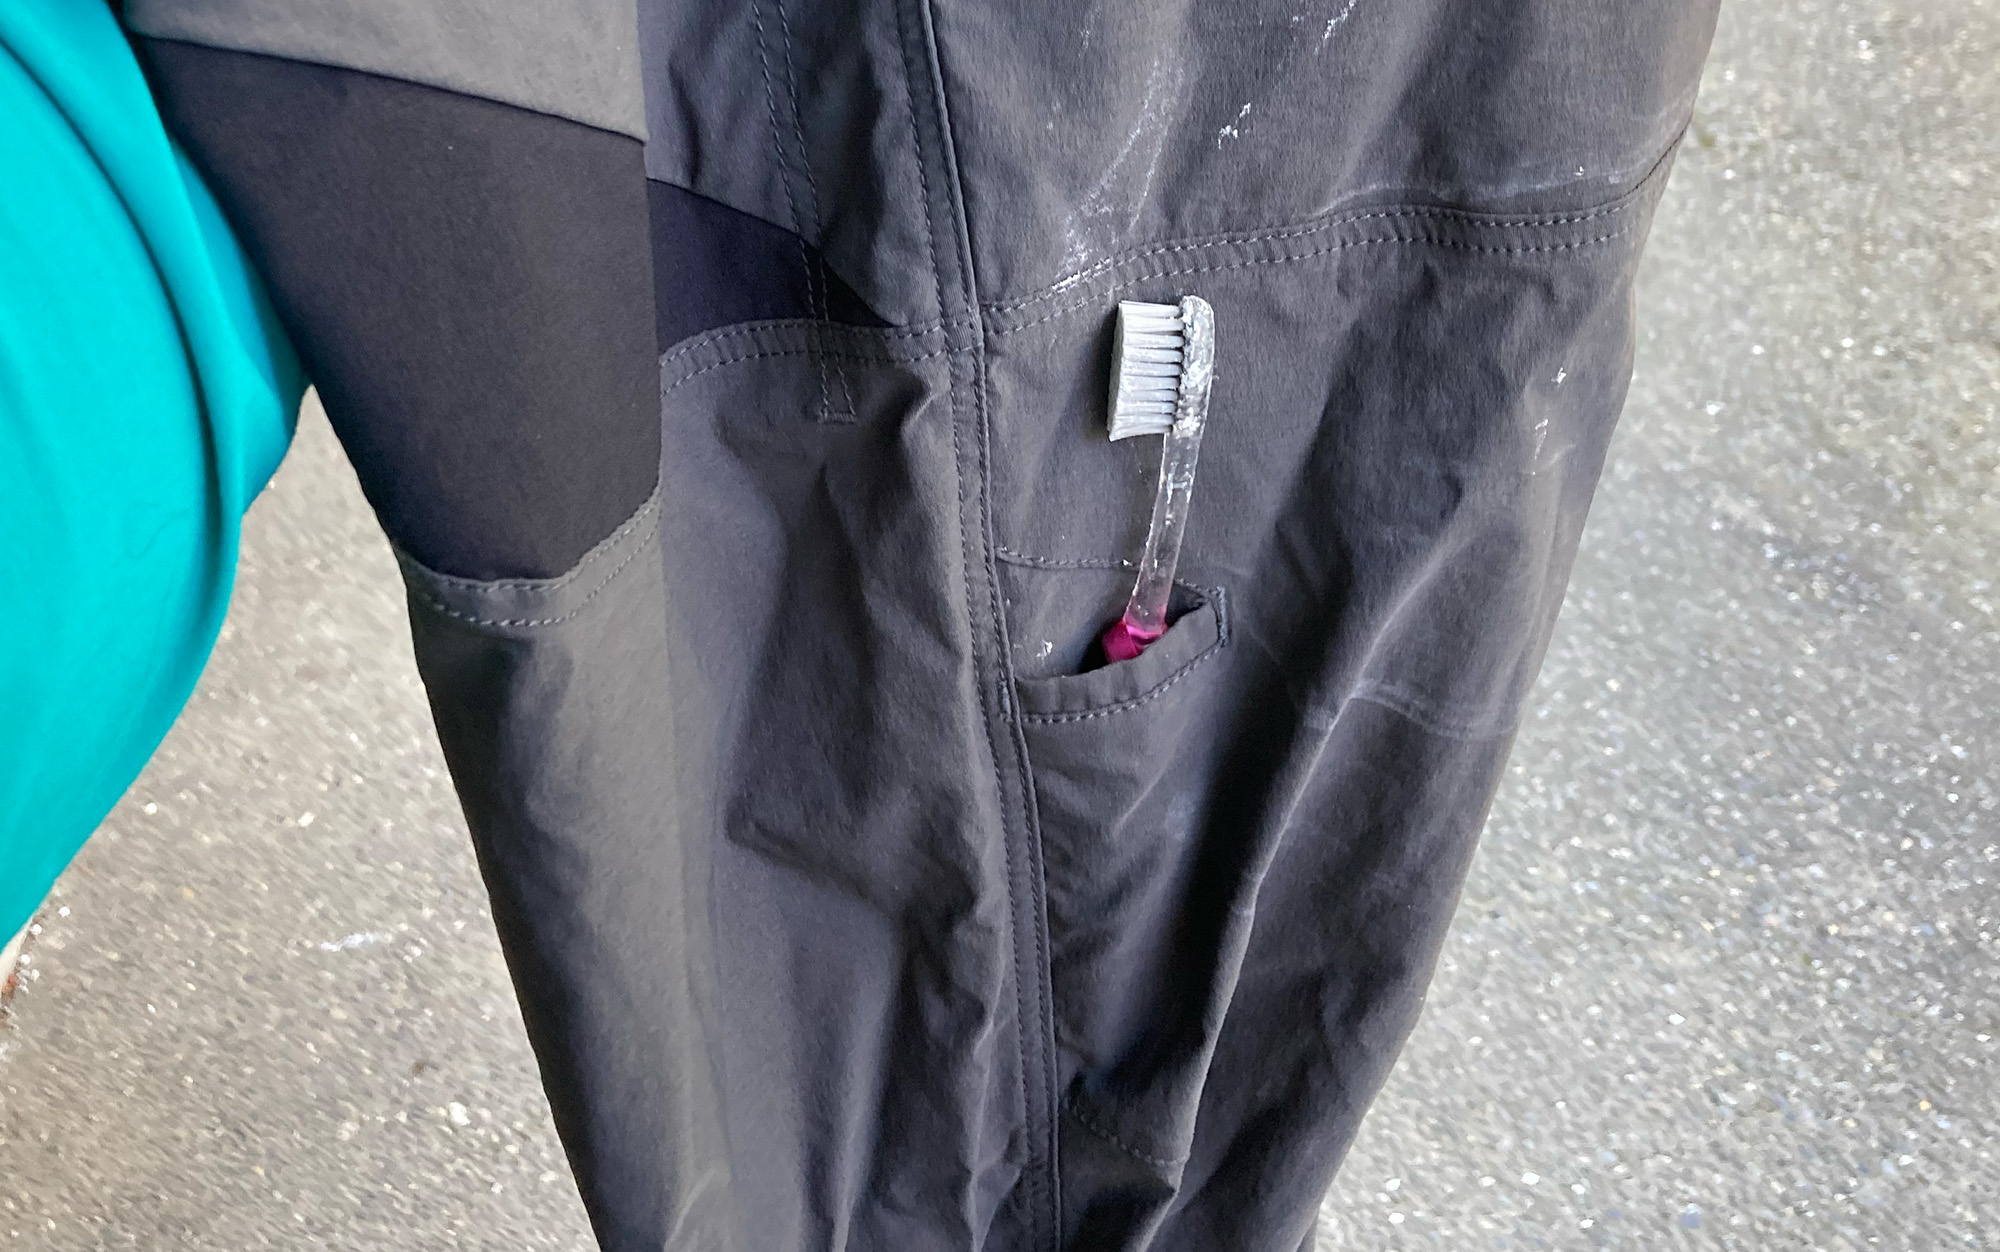 The Talus climbing pants feature a brush pocket.